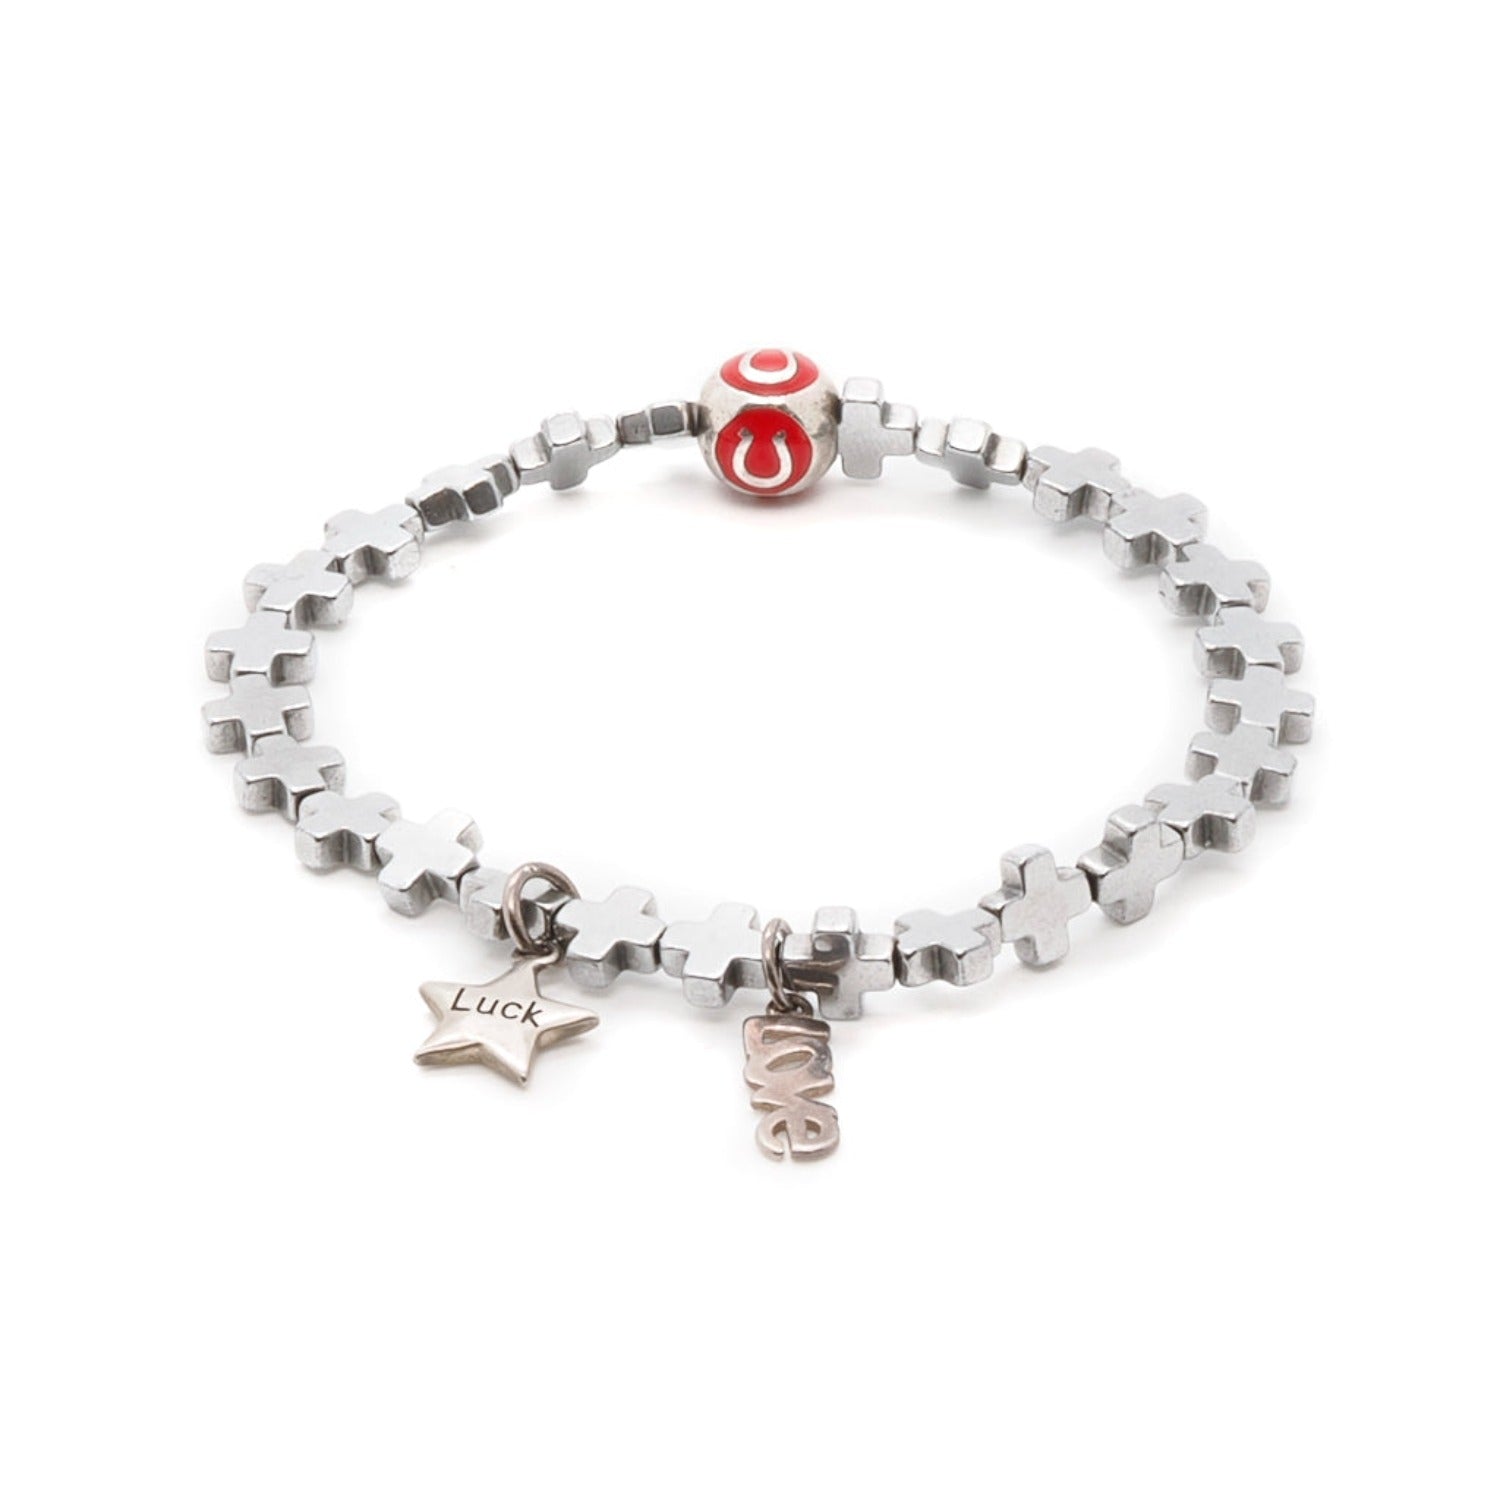 Discover the elegance of the Silver Color Lucky Charms Bracelet, adorned with silver hematite stones and sterling silver lucky charms.